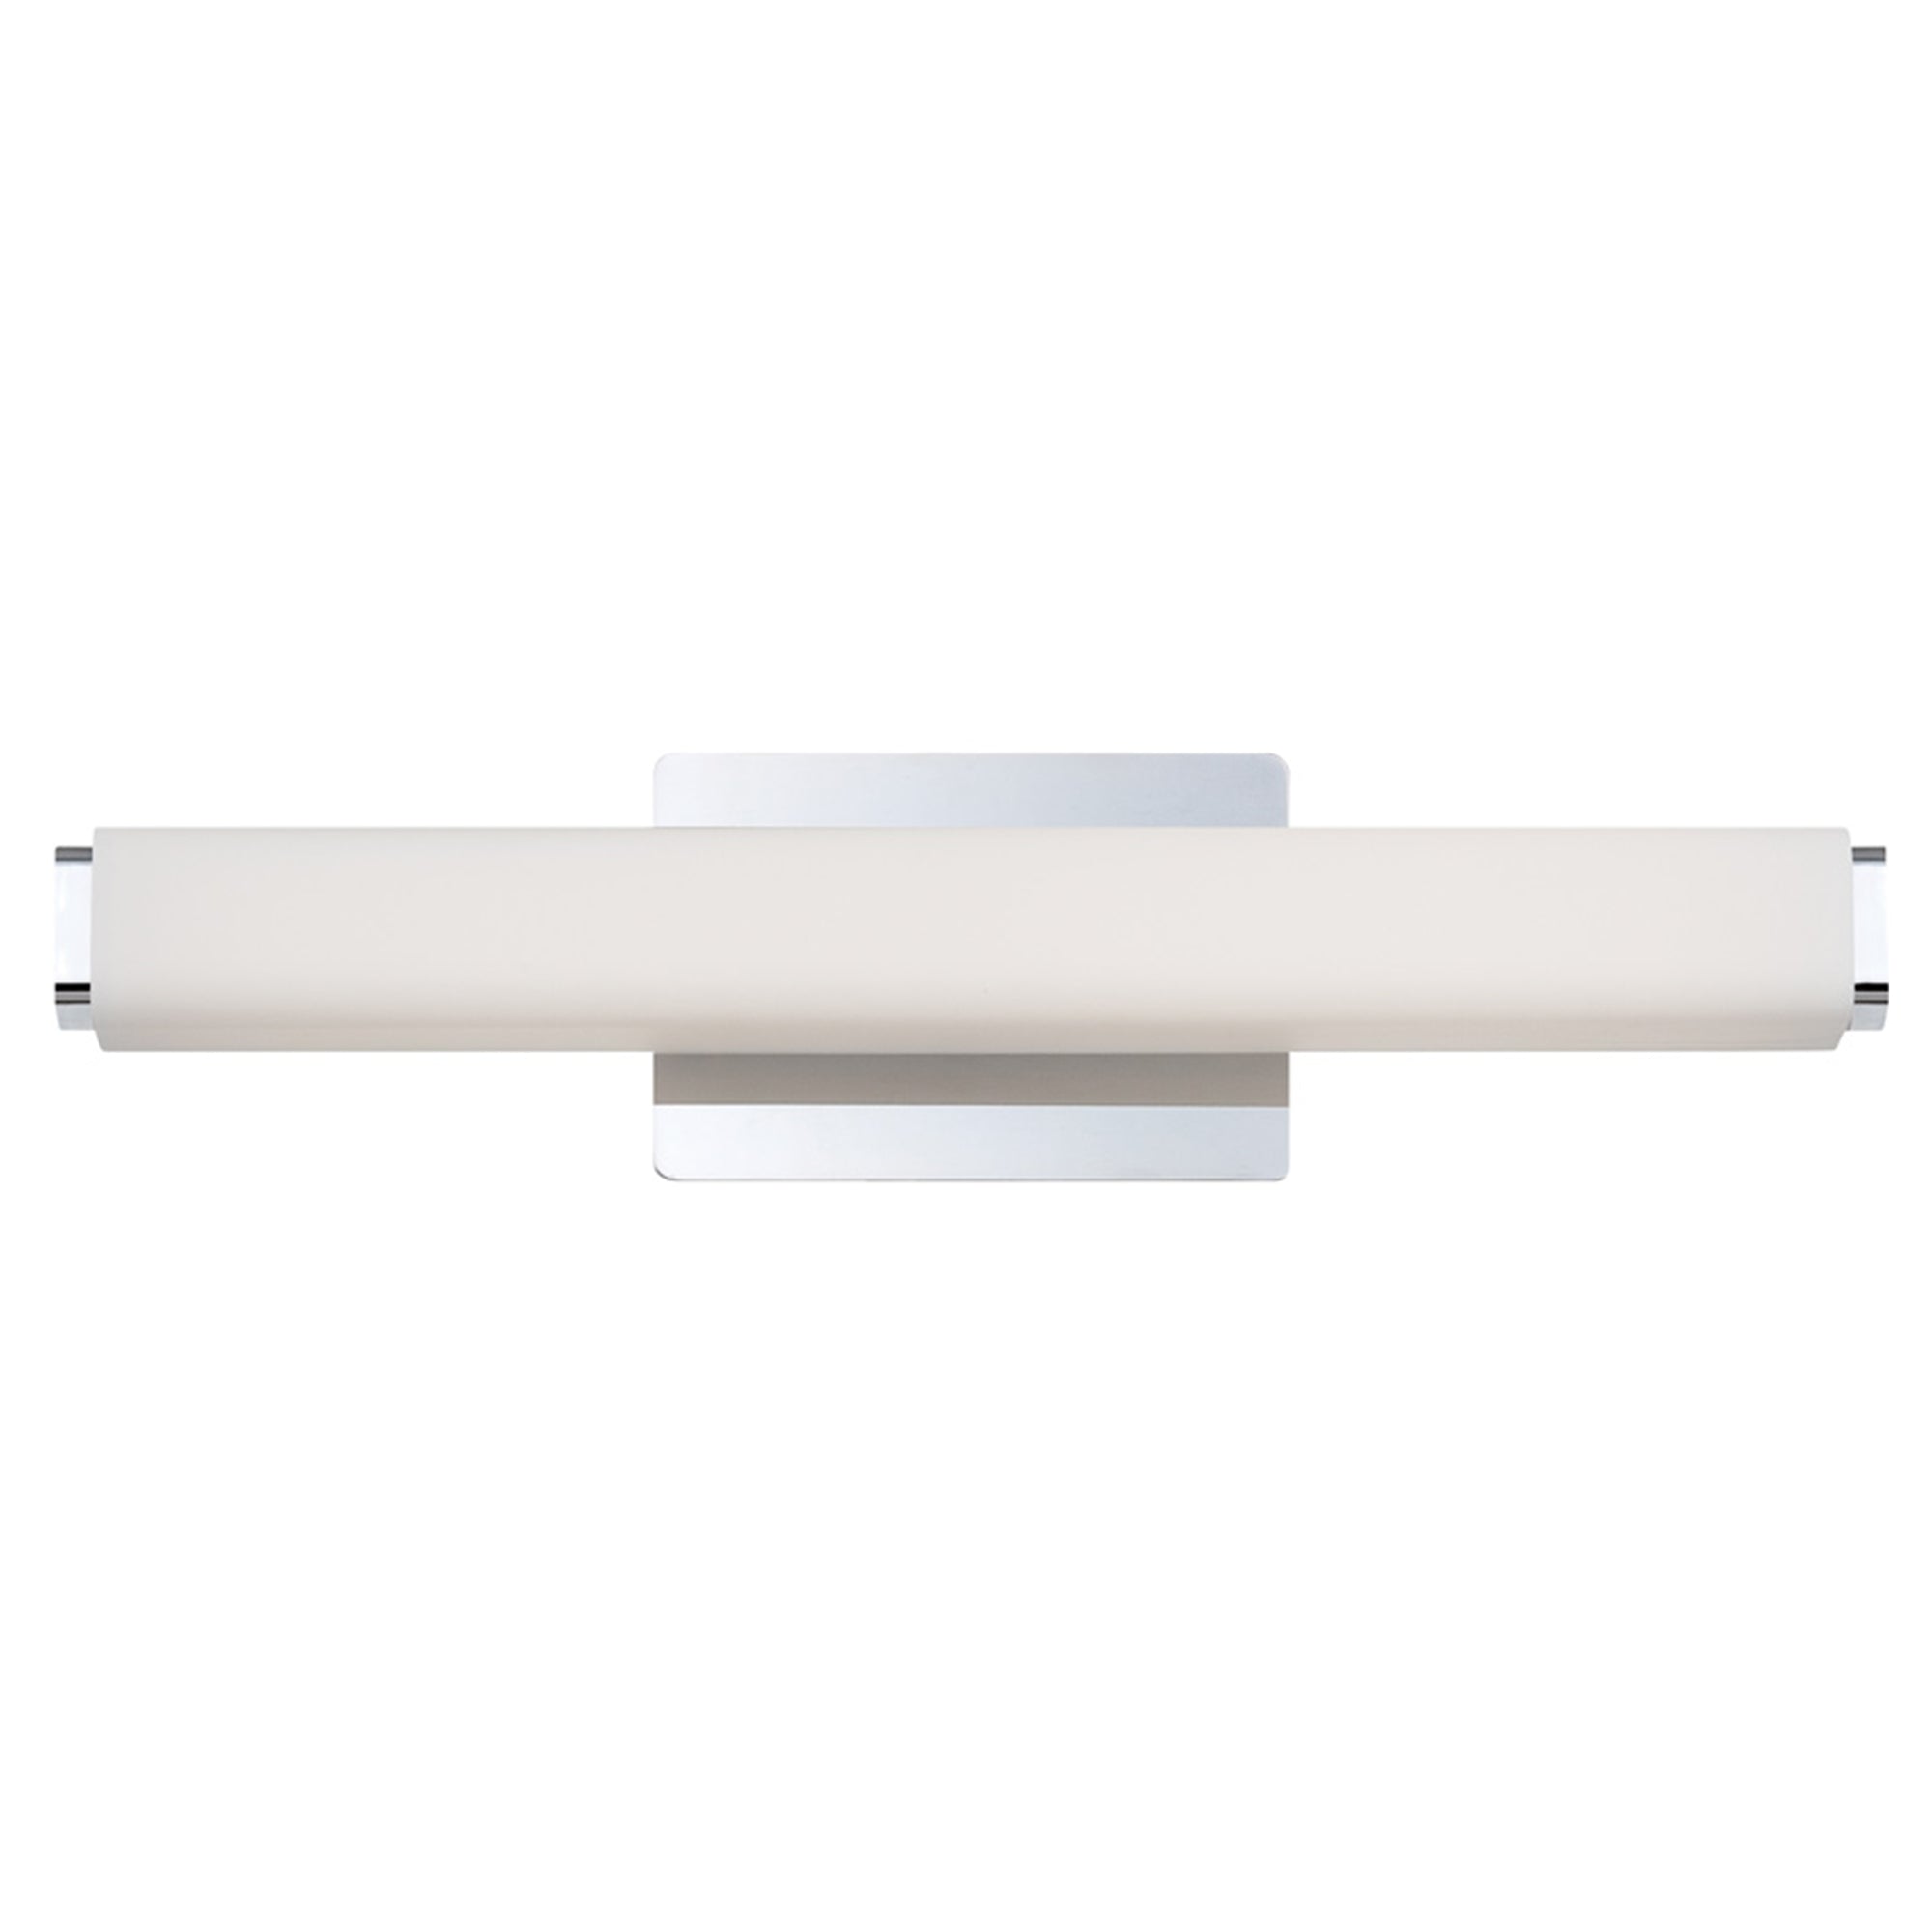 VOGUE Bathroom sconce Chrome INTEGRATED LED - WS-3120-27-CH | MODERN FORMS